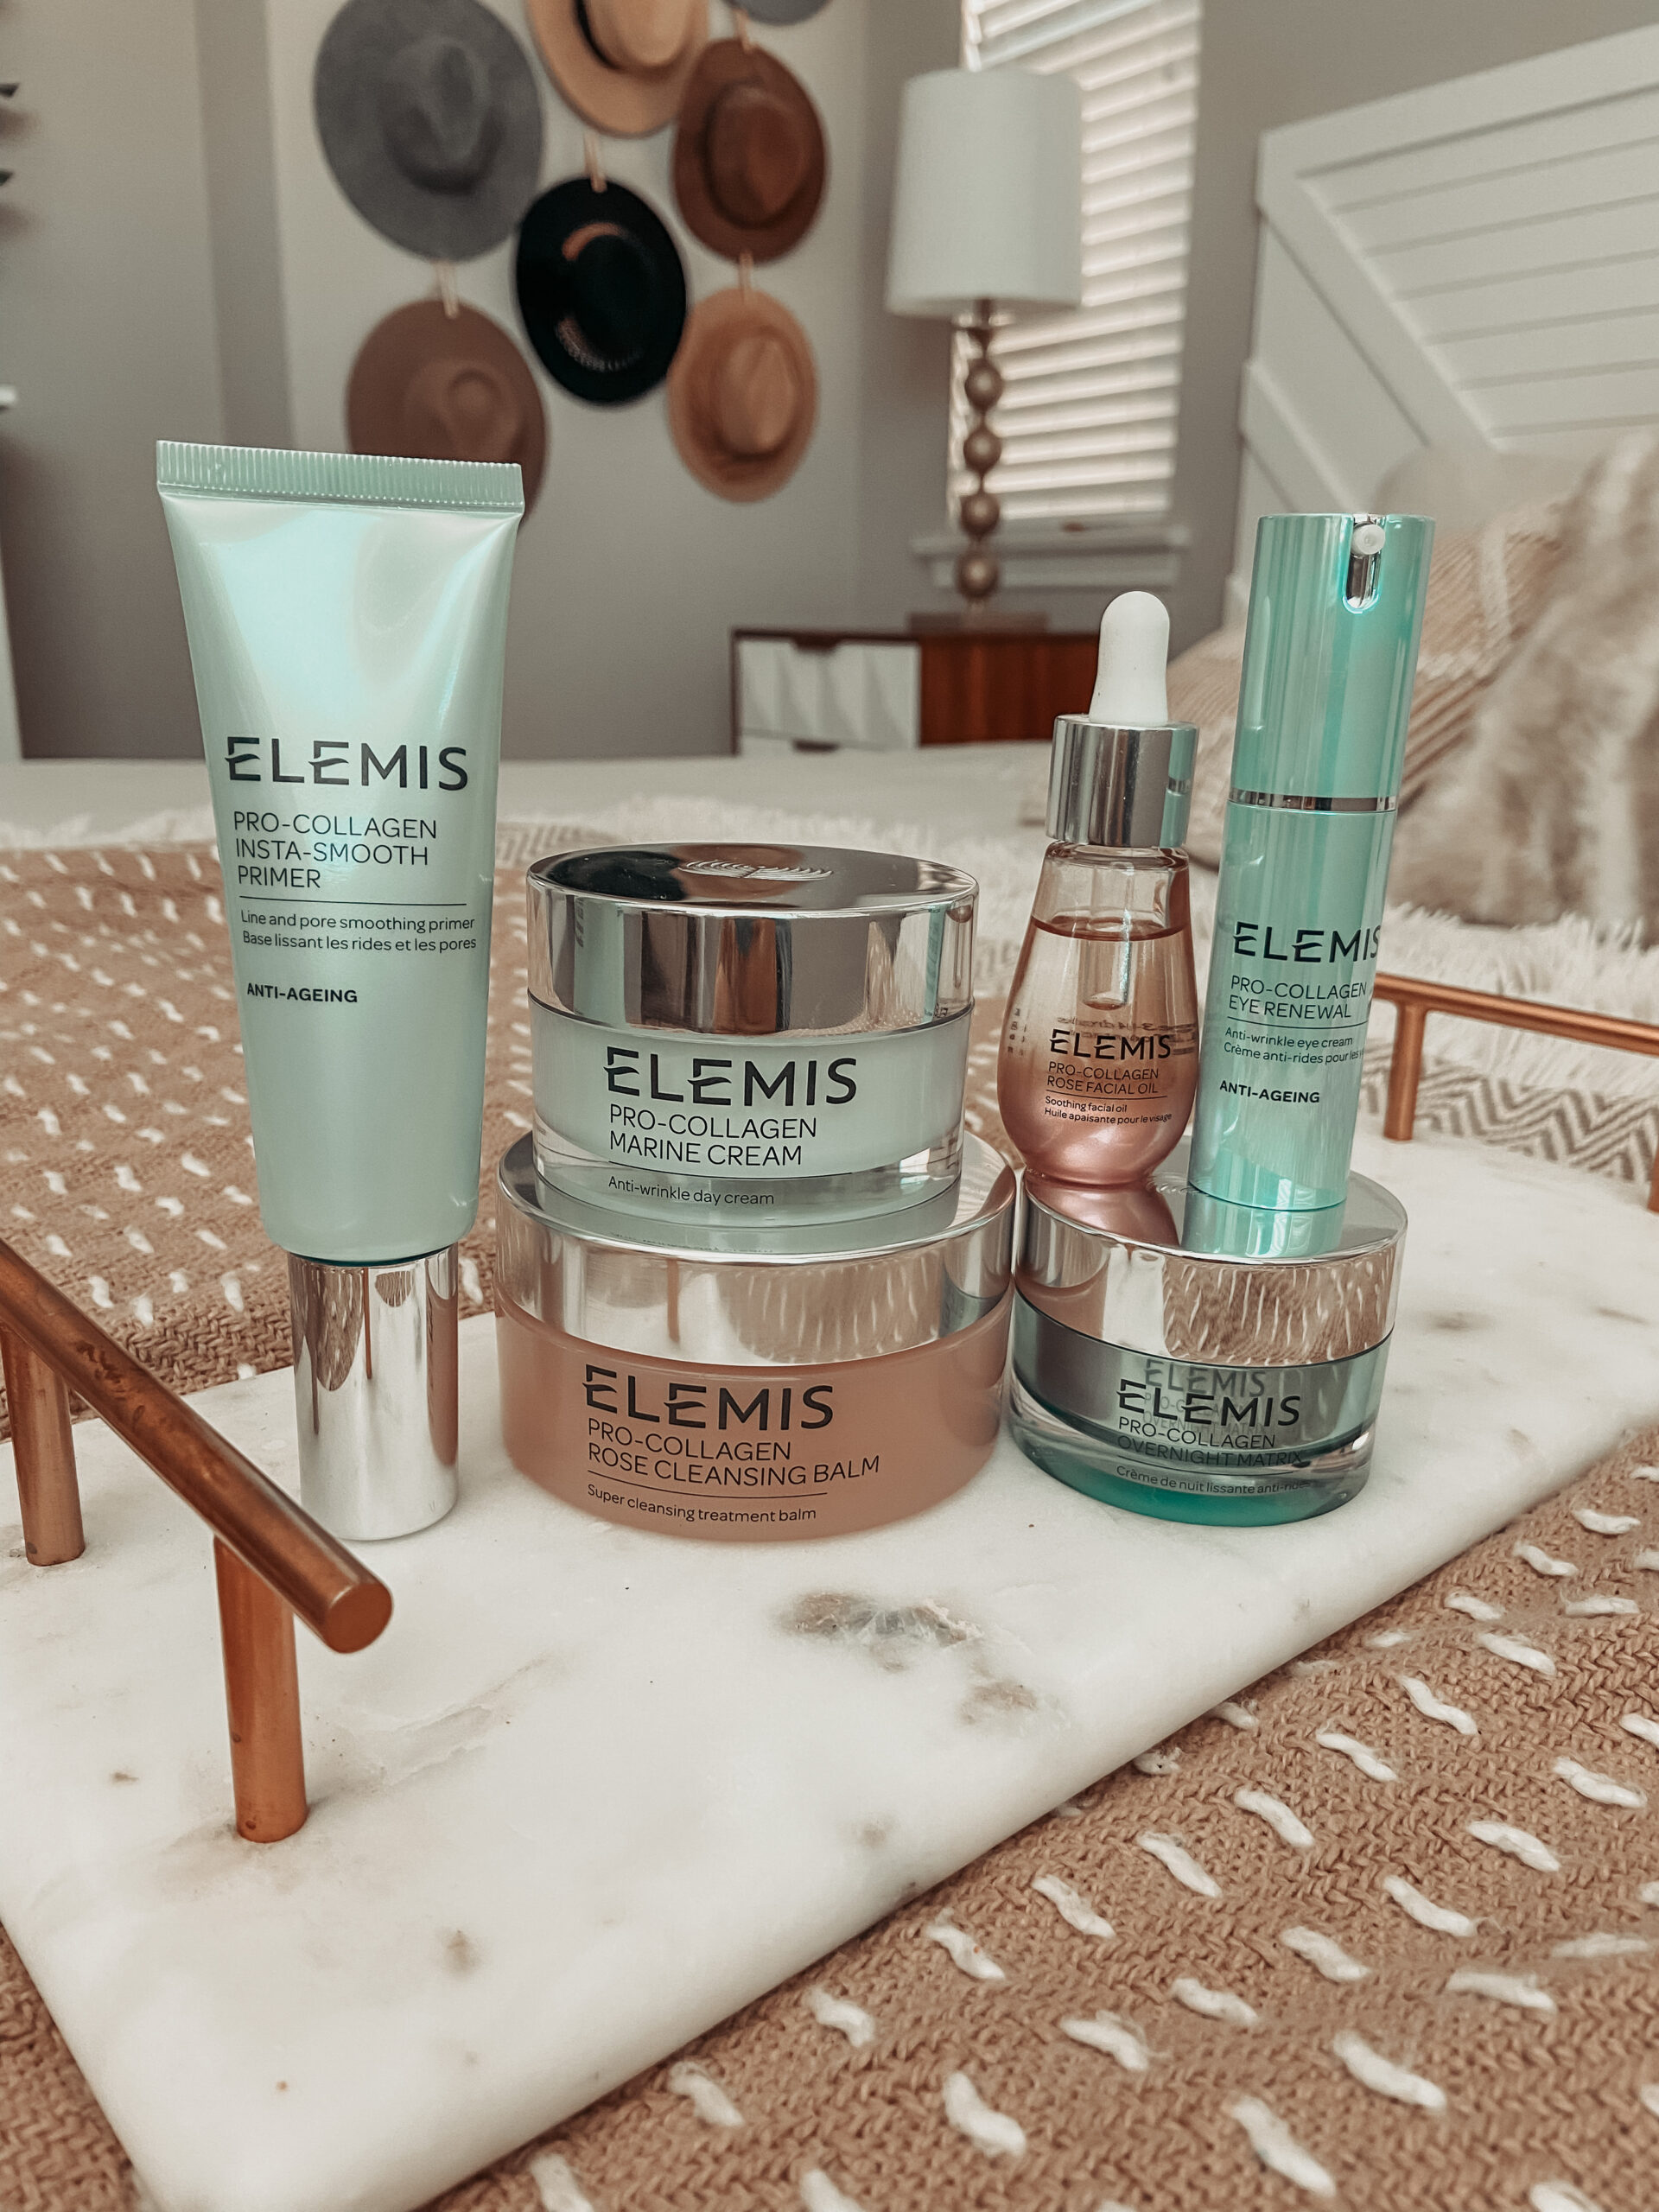 MY HOLY GRAIL DAY CREAM + MORE ELEMIS FAVORITES- Jaclyn De Leon Style + sharing my skincare essential from Elemis + why I can't live without their pro collagen anti wrinkle day cream